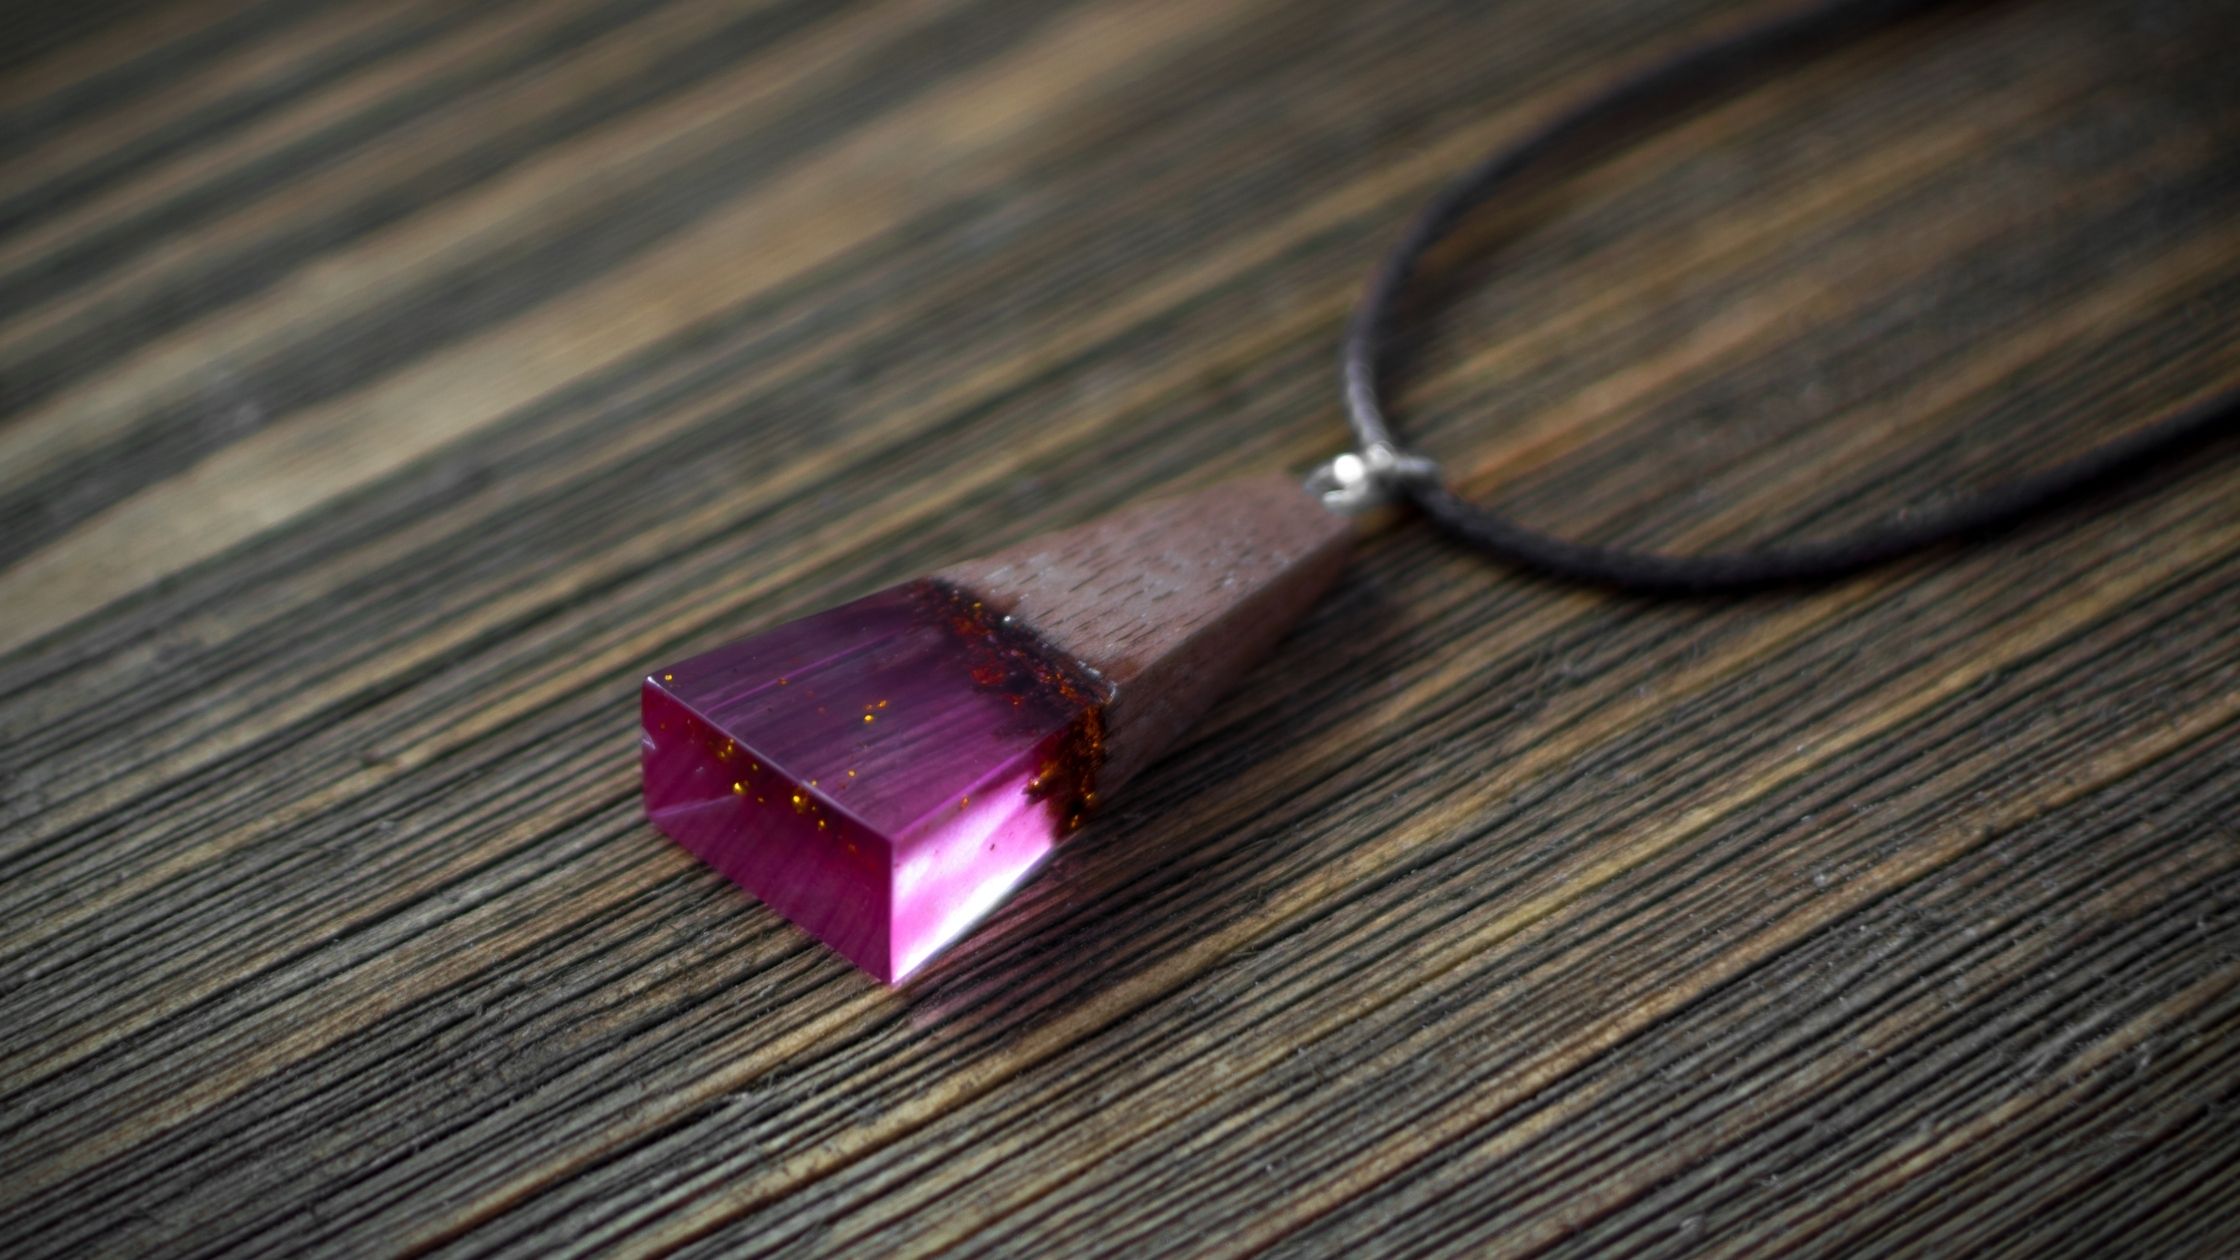 jewel on a necklace made of purple epoxy resin and wood